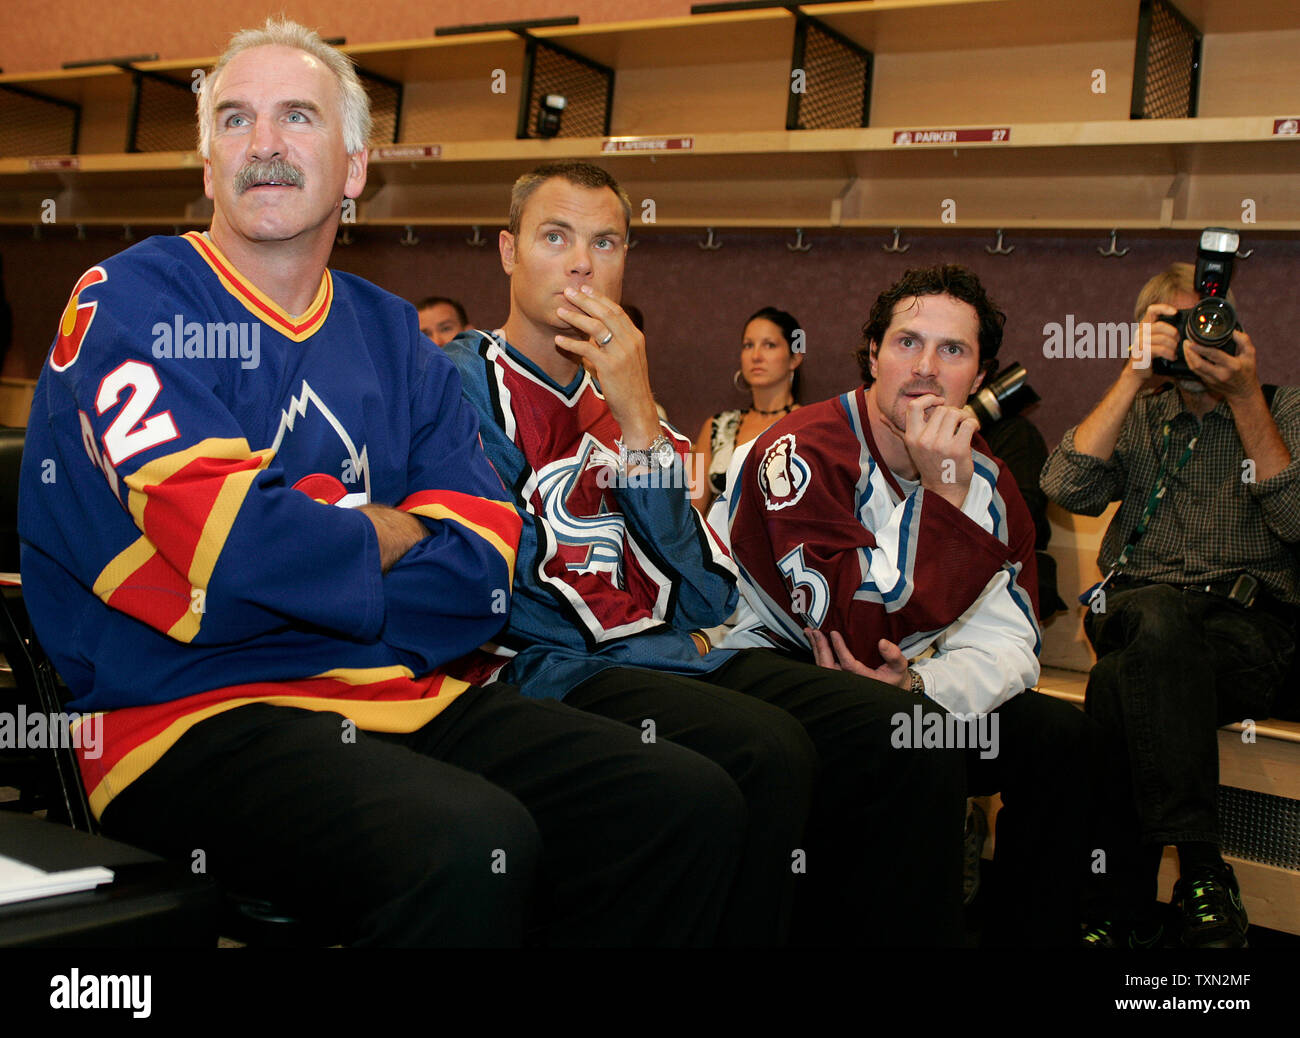 Colorado Avalanche defenseman John-Michael Liles models the new Avalanche  Reebok designed uniform against the background of past uniforms during a  press conference at the Pepsi Center in Denver on September 12, 2007.